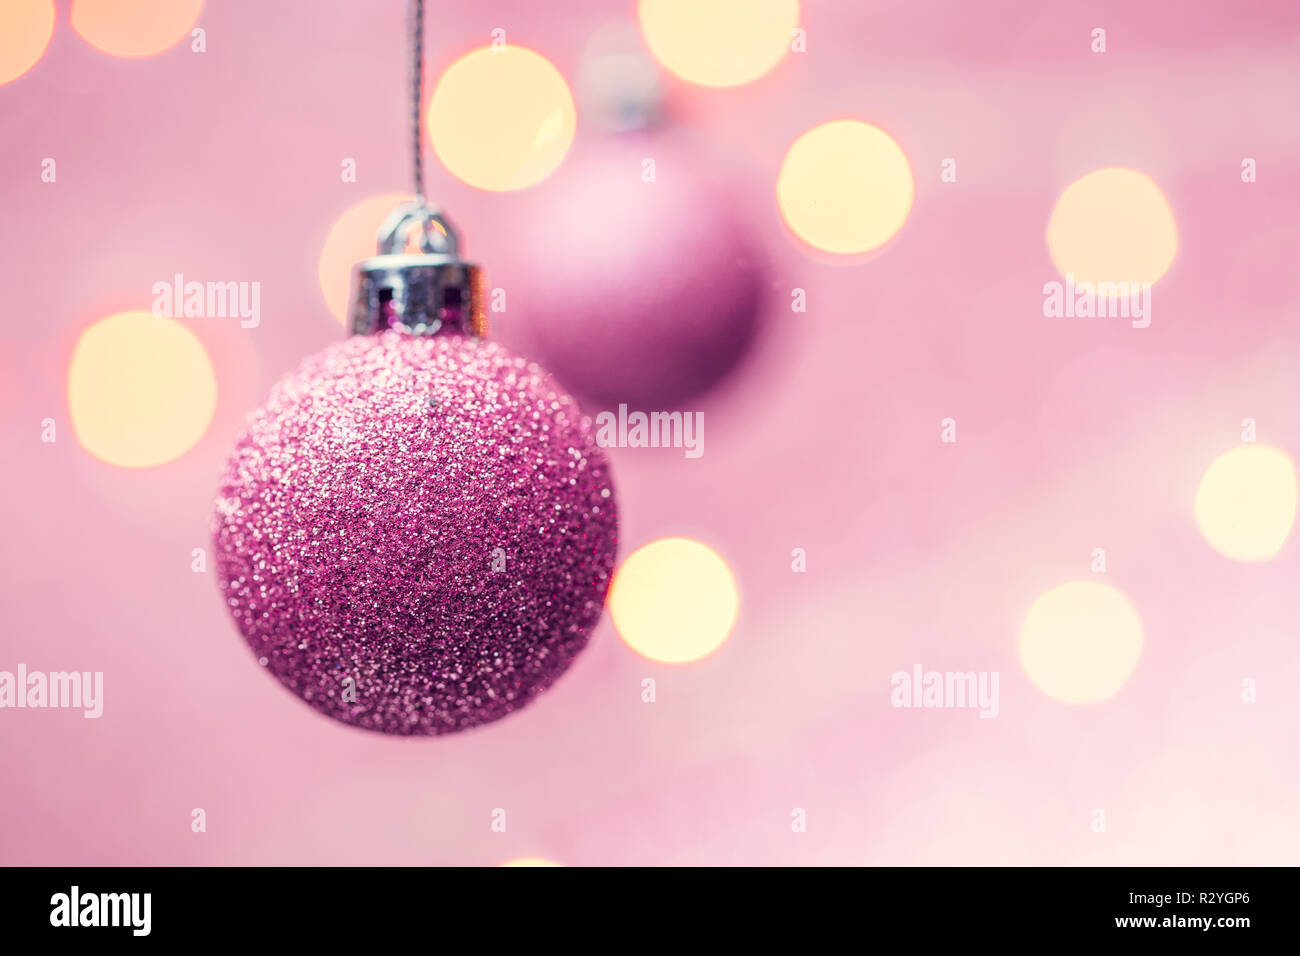 Photo of two New Year's pink balls on pink background with spots. Place for text Stock Photo